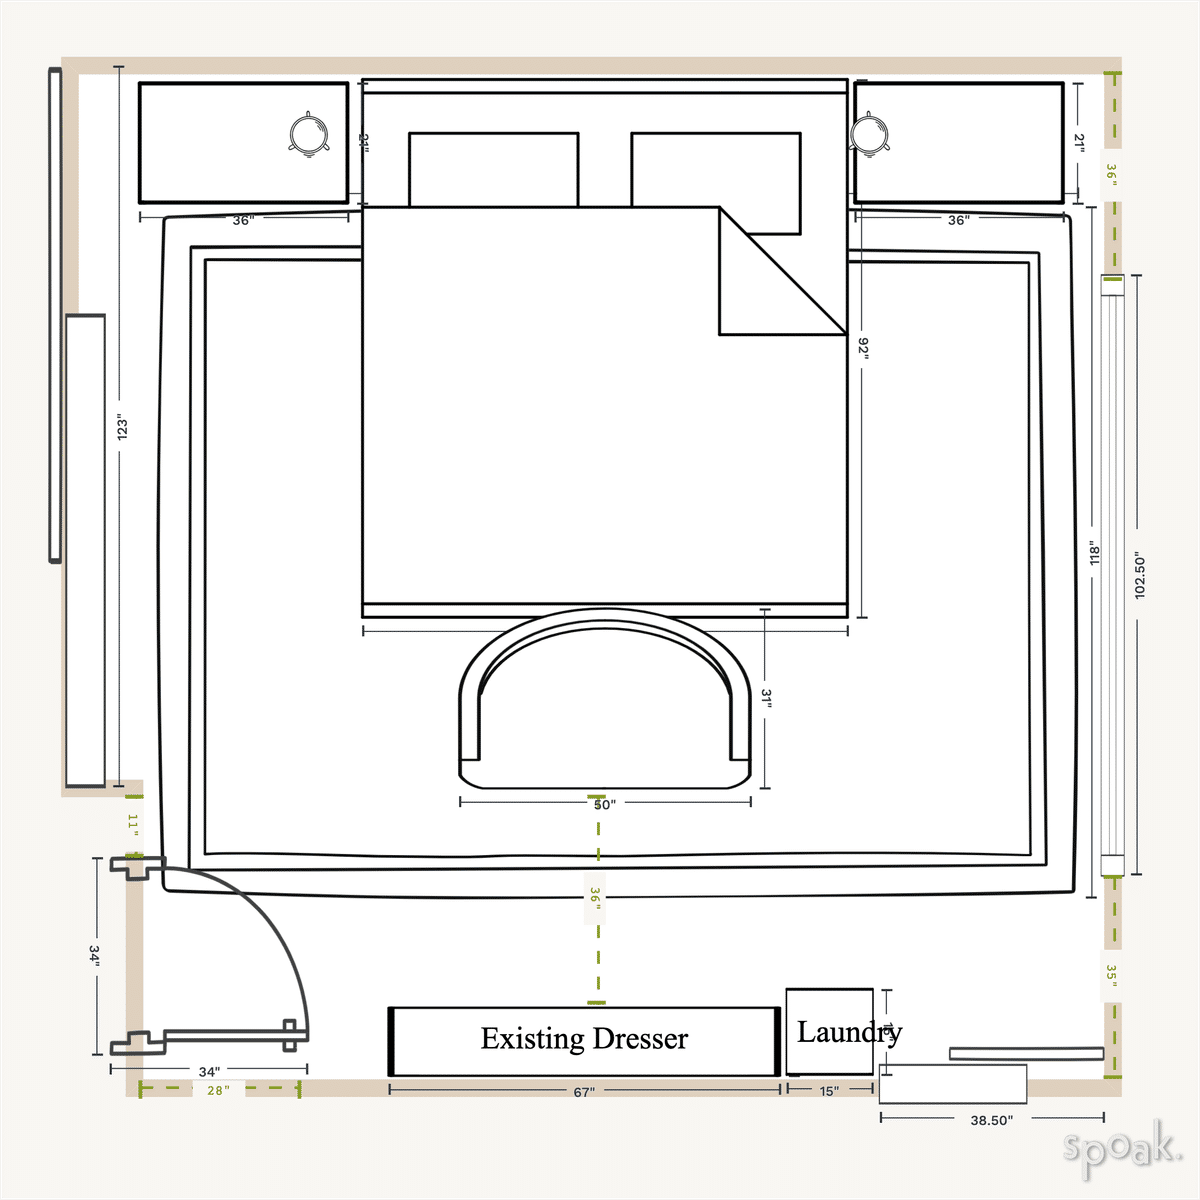 L Shaped Bedroom Layout designed by Averyl Yaco